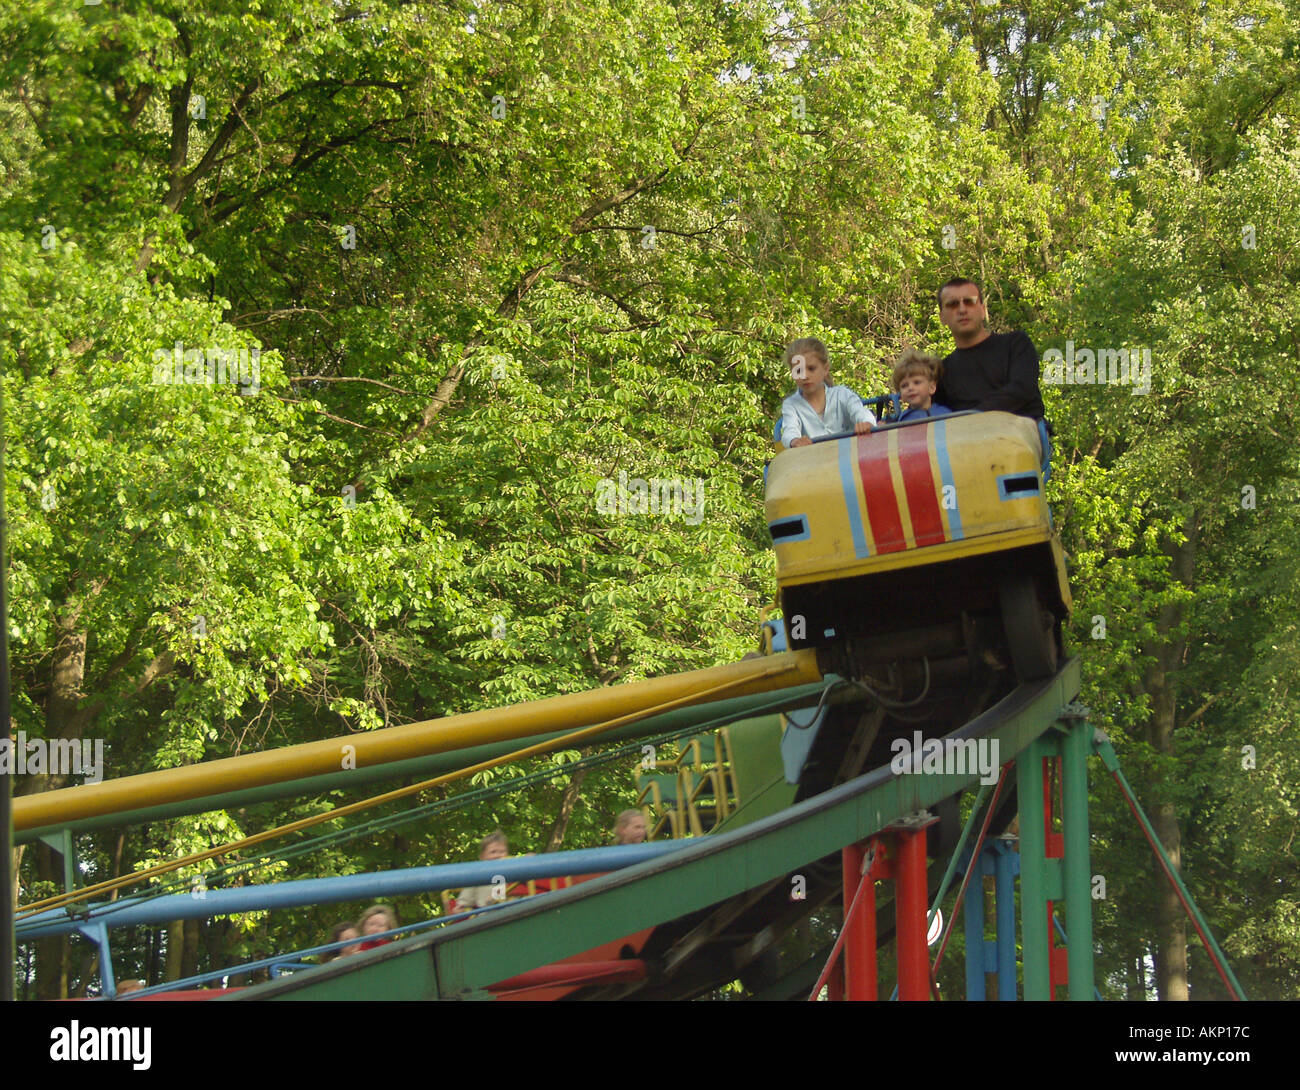 Rollercoaster in motion with passengers at traditional fairground in Gomel Park, Gomel, Belarus Stock Photo